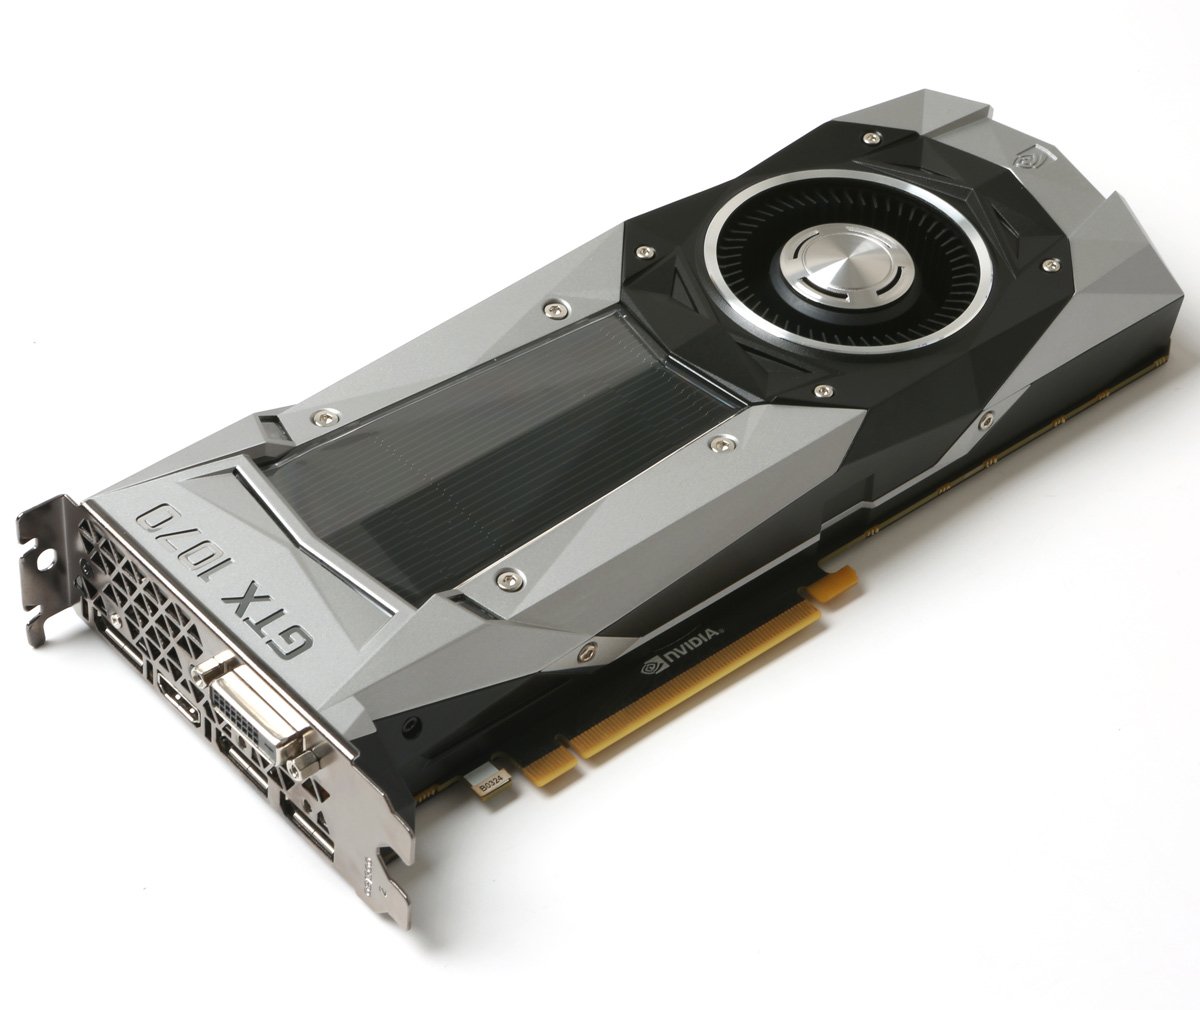 The NVIDIA GeForce GTX 1070 will be available from Overclockers UK at